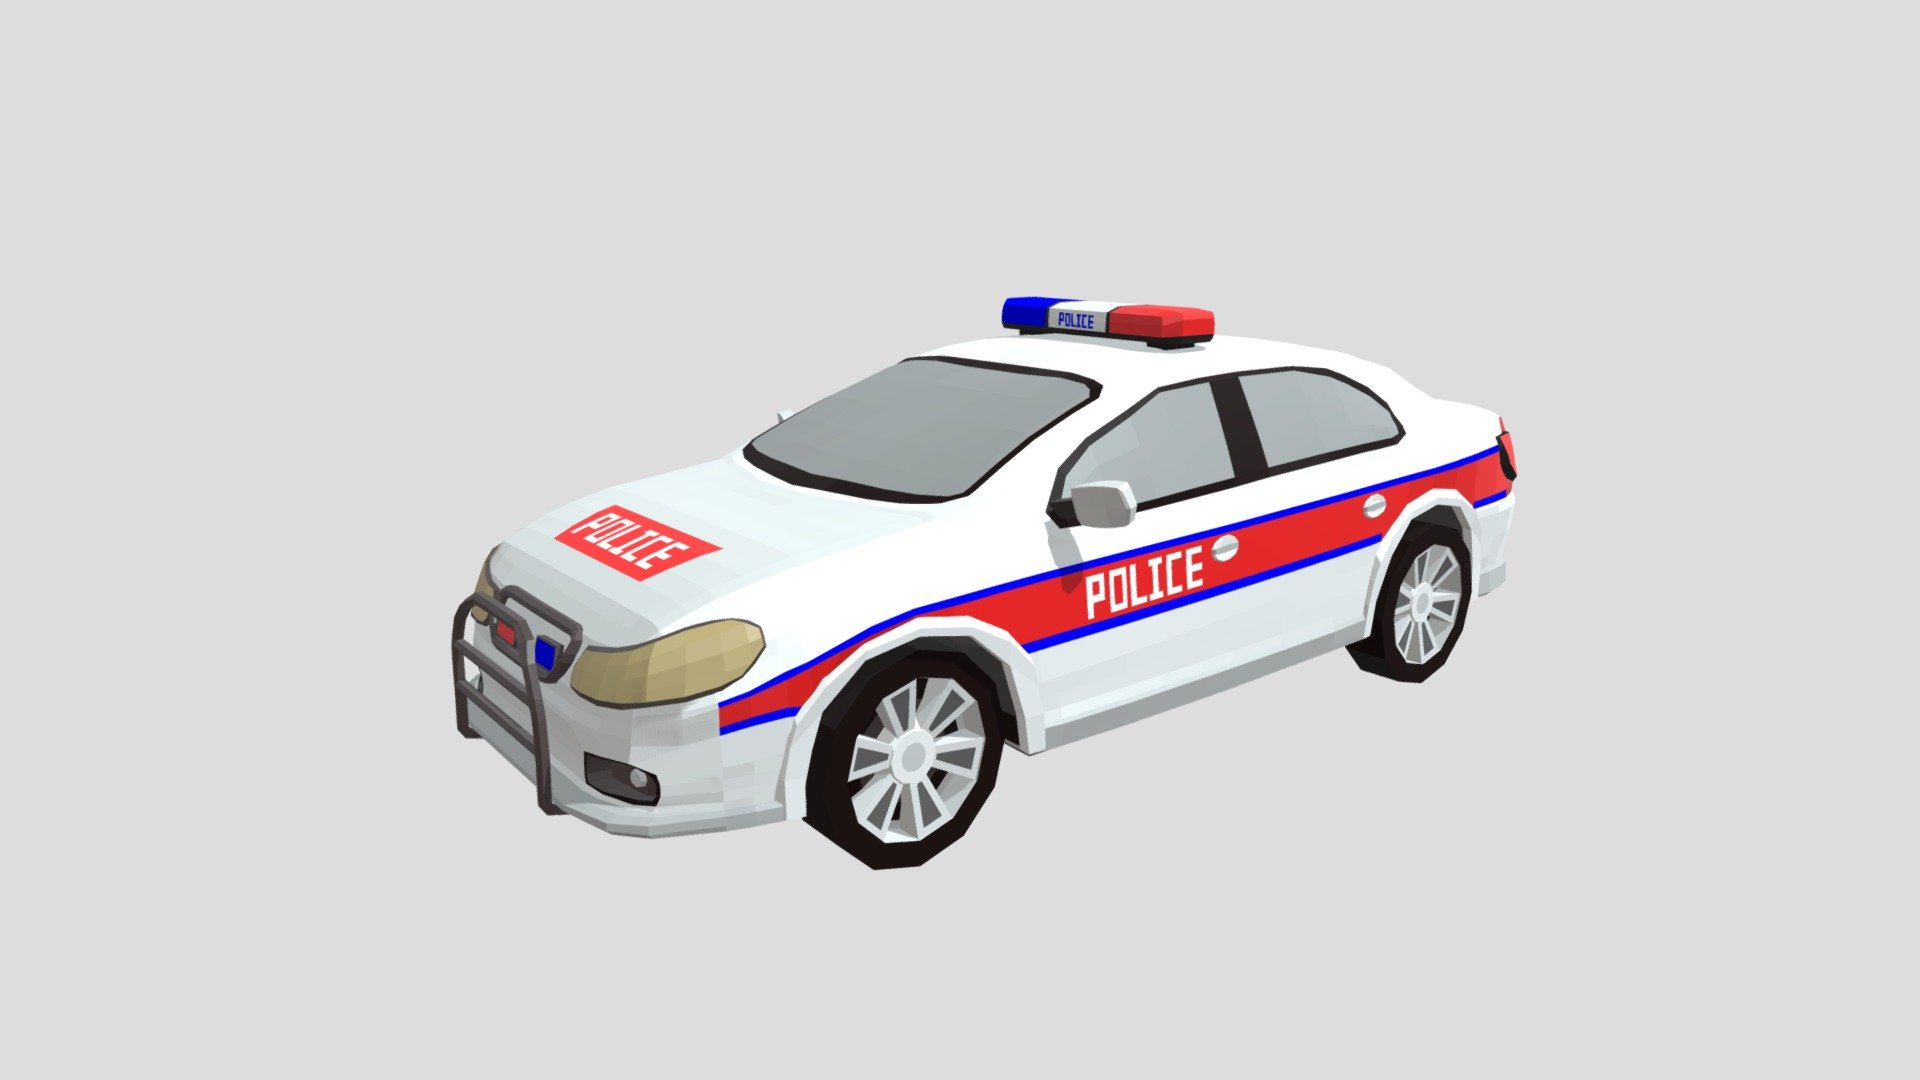 Visit businessyuen.com for more information.
Download my free game 
https://play.google.com/store/apps/details?id=com.businessyuen.CanYouReach1500m - Hong Kong Police Car - Buy Royalty Free 3D model by businessyuen 3d model